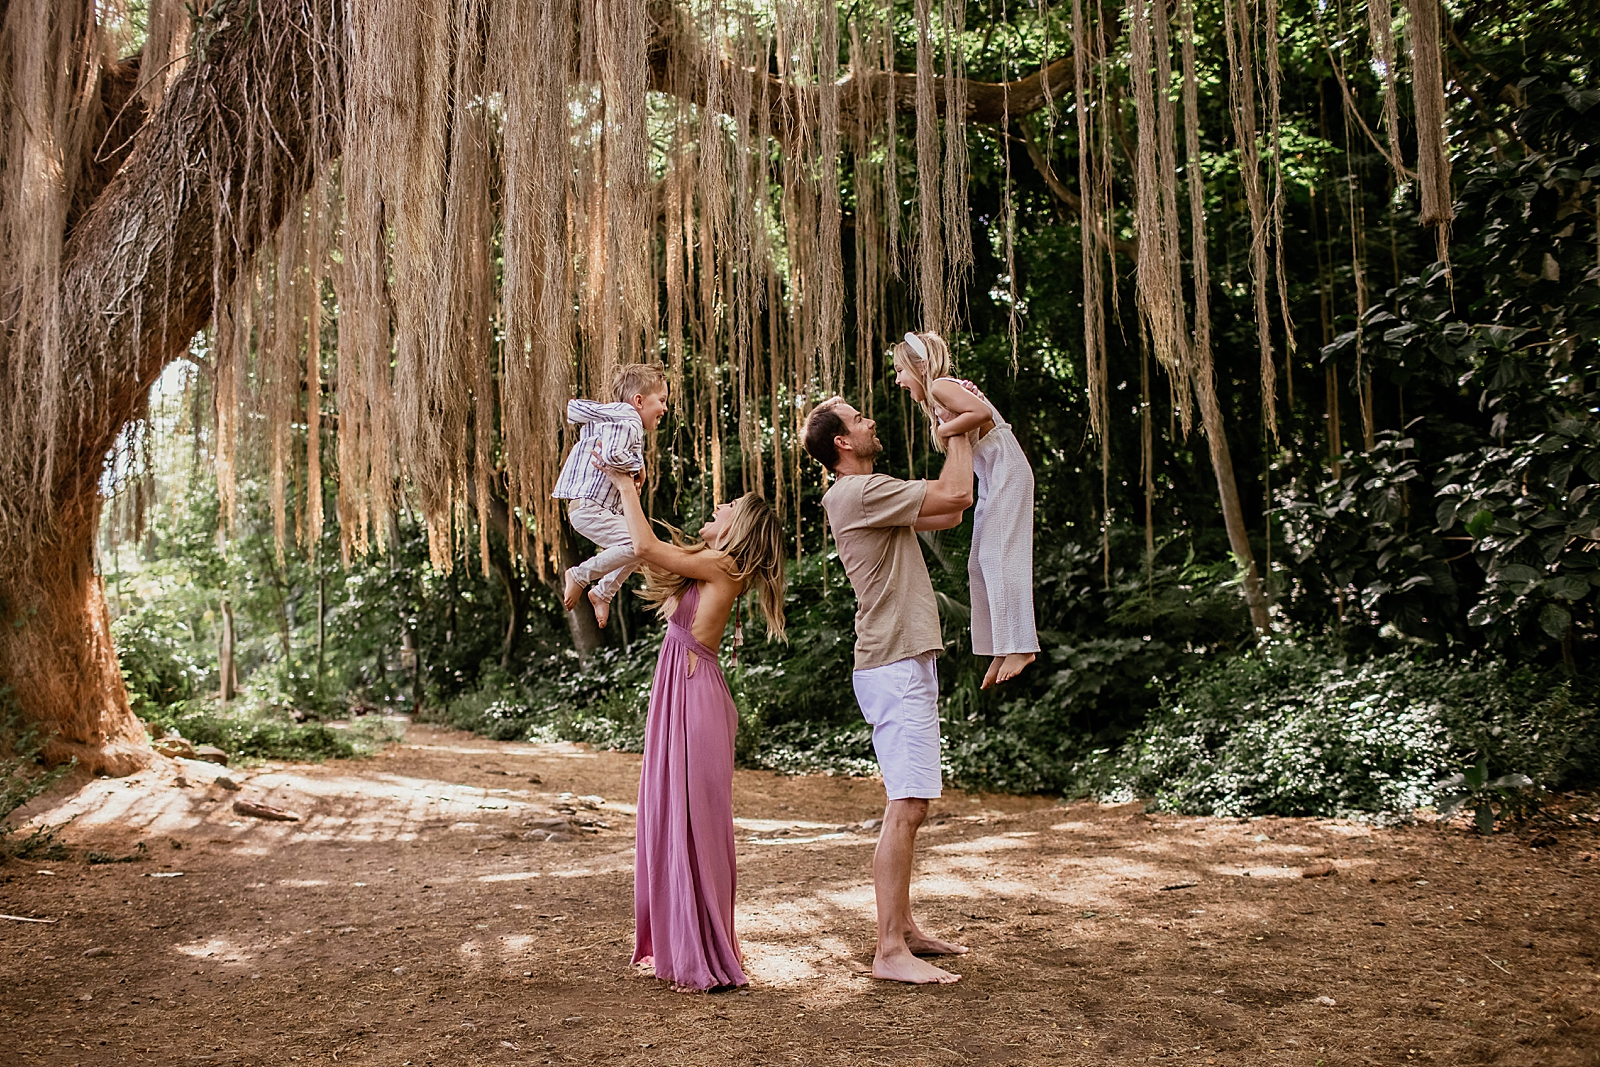 Parents holding up kids underneath a large tree with long dried leafs